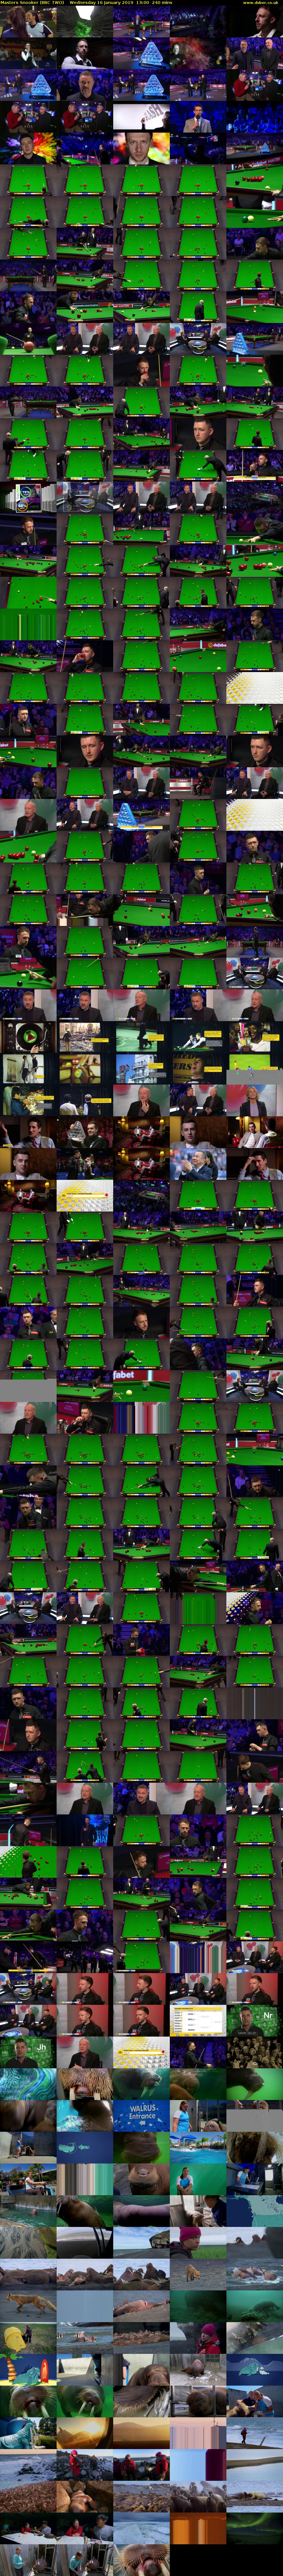 Masters Snooker (BBC TWO) Wednesday 16 January 2019 13:00 - 17:00